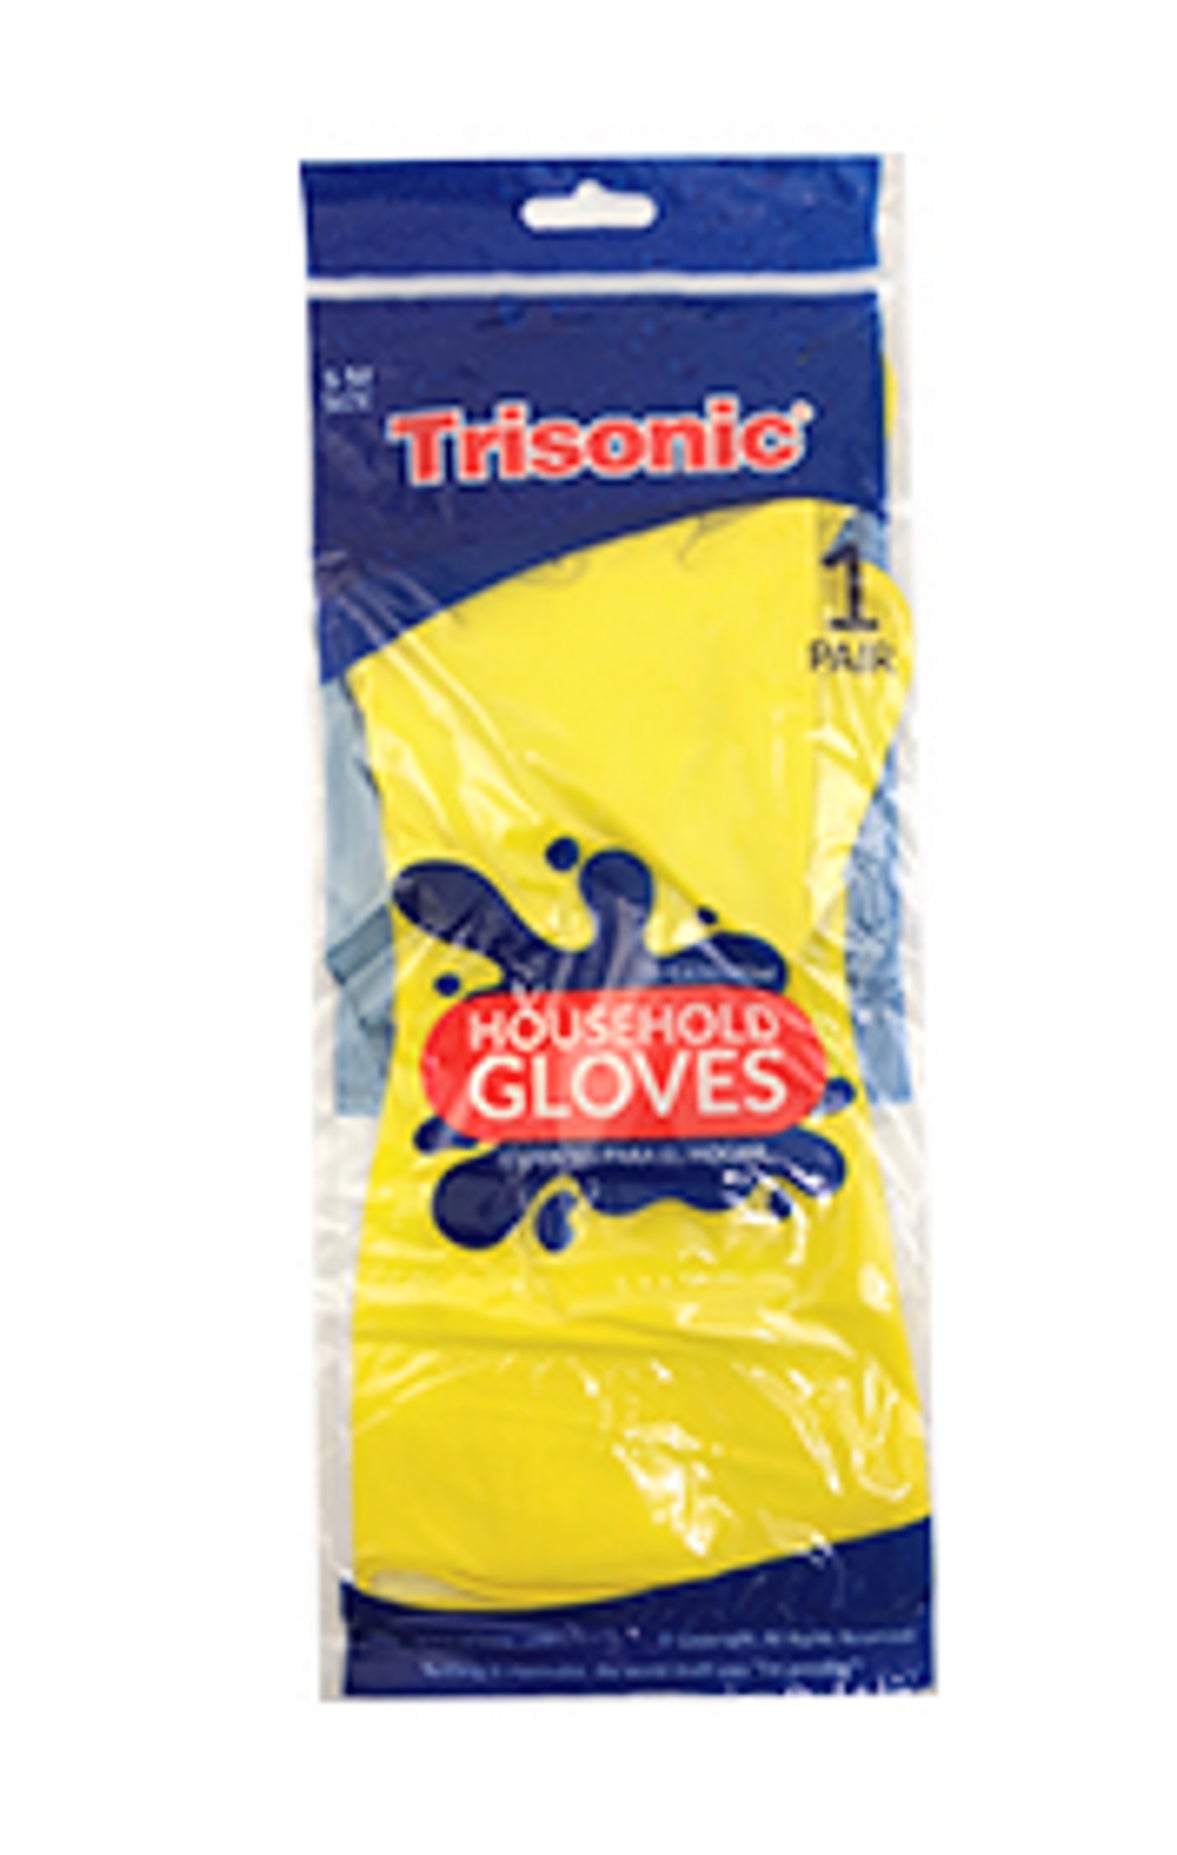 Reusable Household Gloves, Rubber Dishwashing Gloves, Painting, Gardening, Pet Caring and more